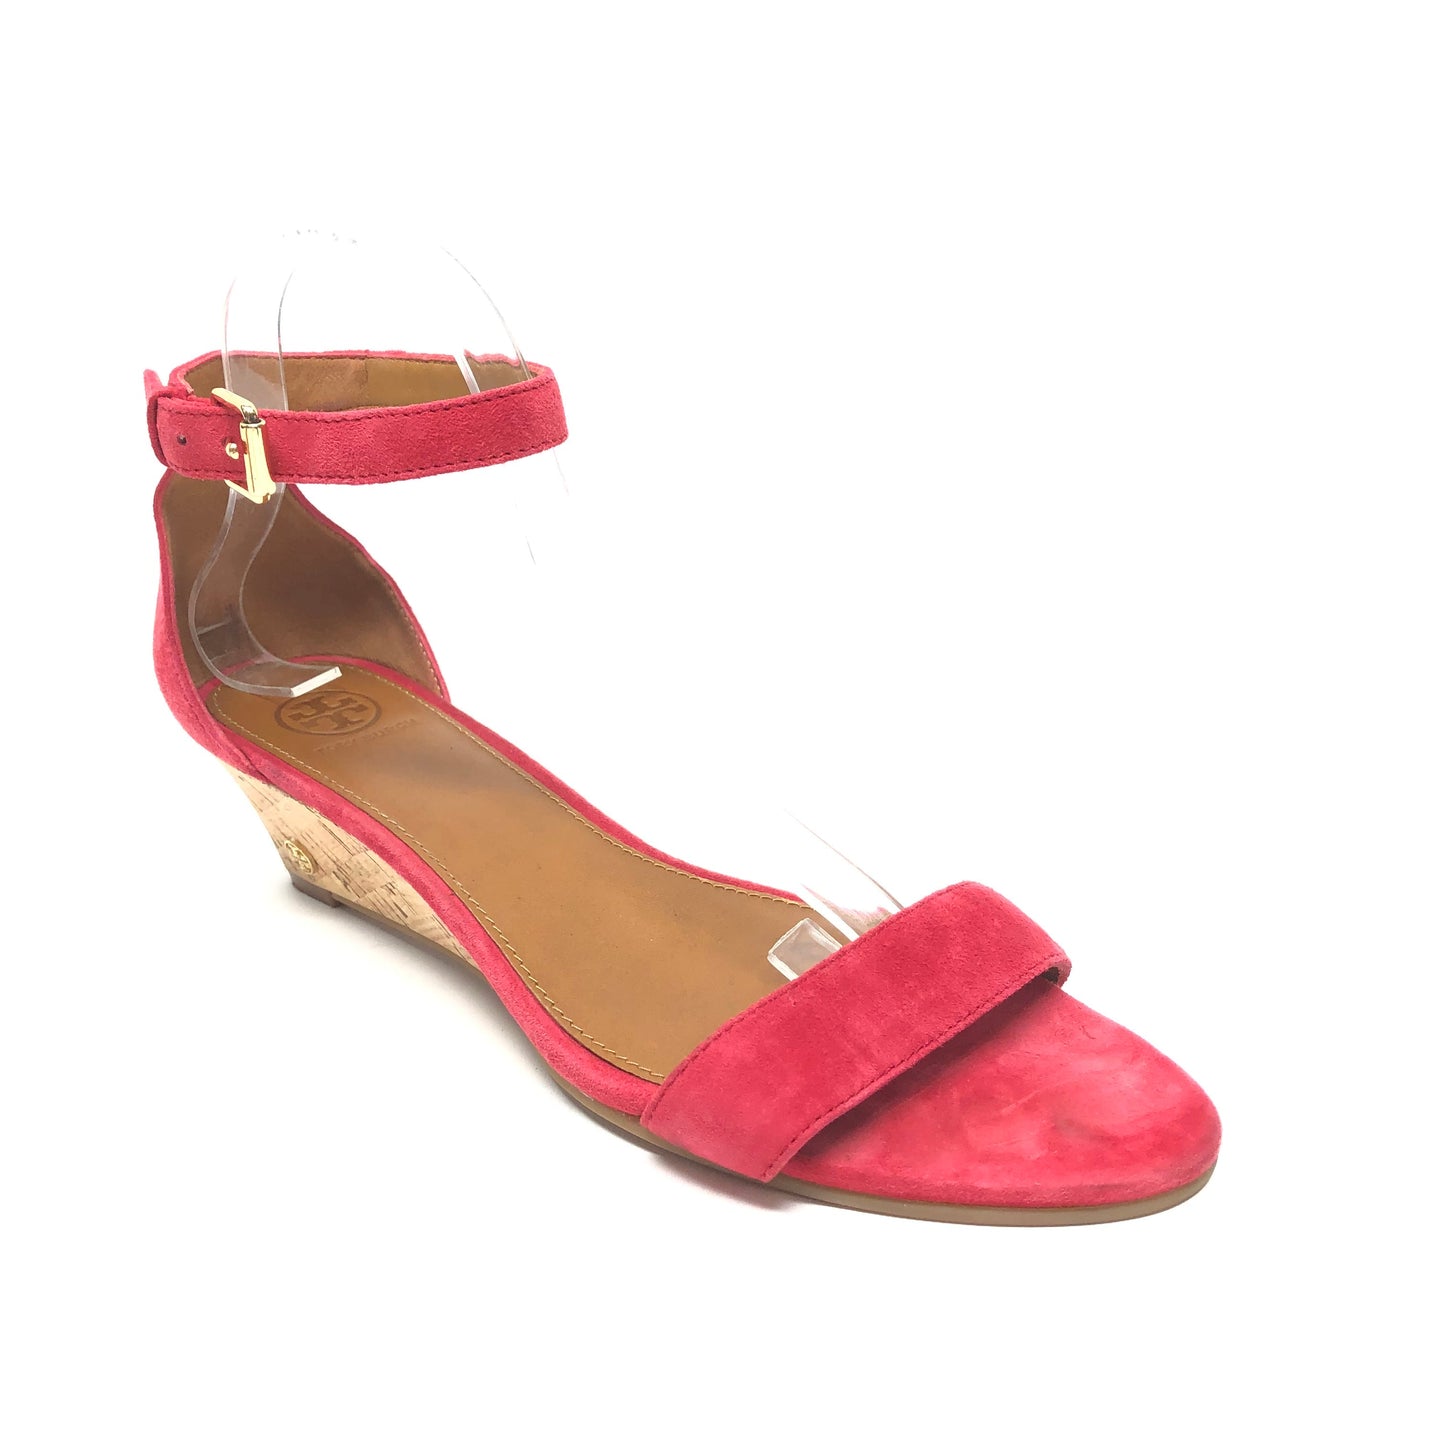 Red Shoes Designer Tory Burch, Size 10